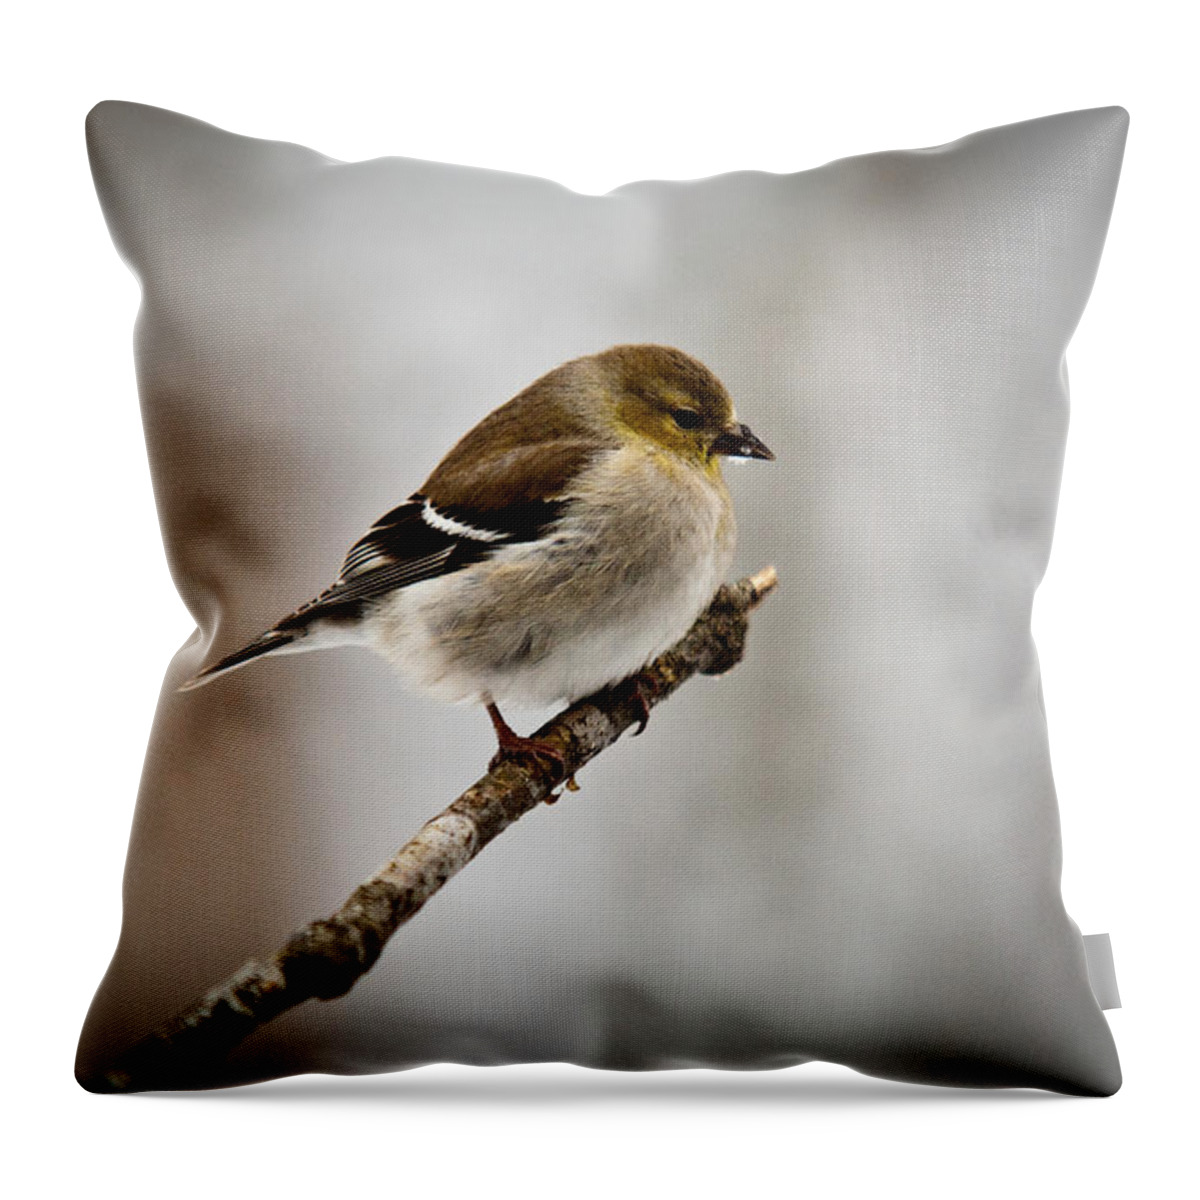 Fledging Throw Pillow featuring the photograph Fledging American Goldfinch 4 by Douglas Barnett